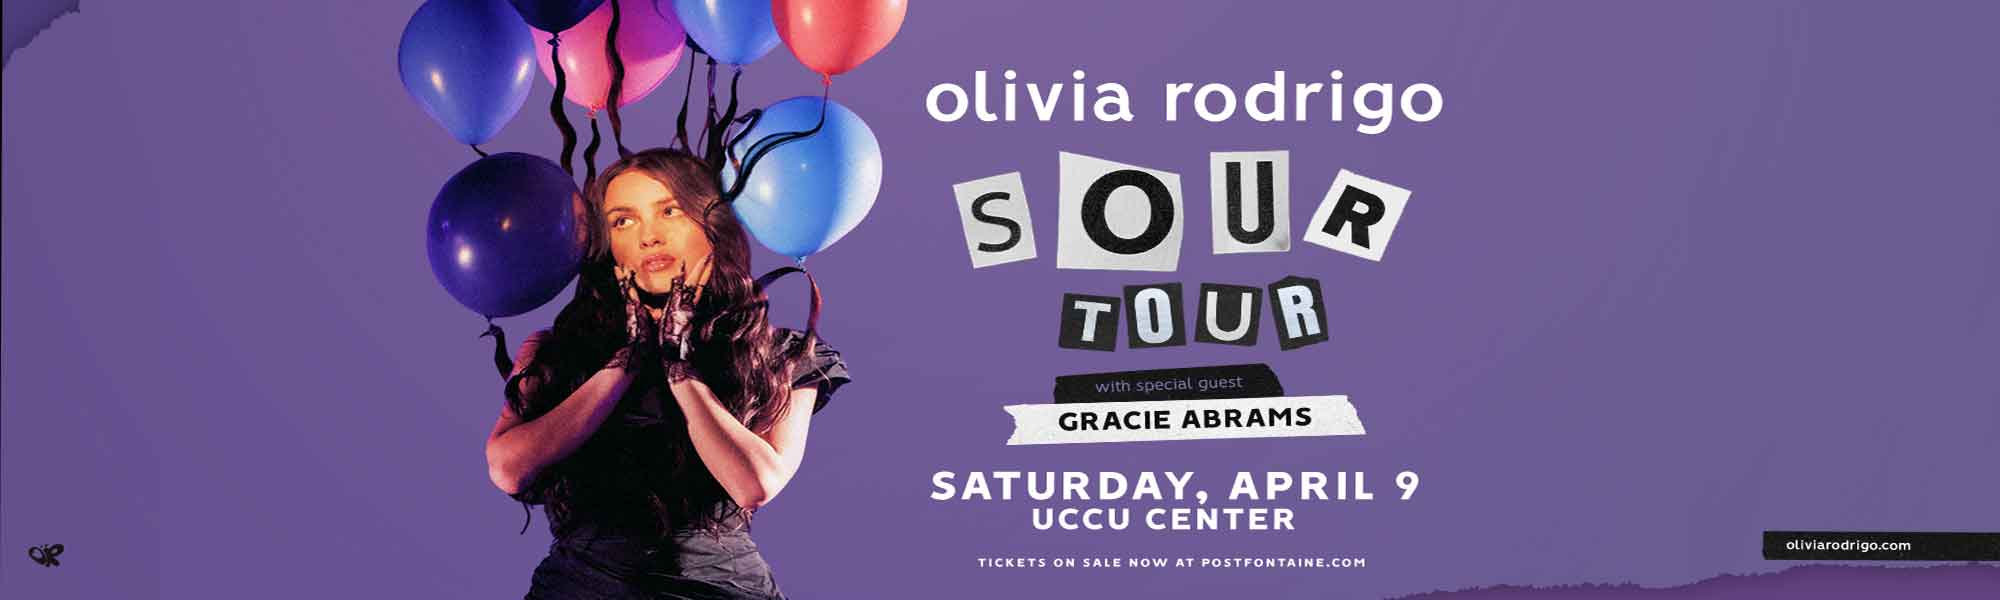 Oliva Rodrigo, Sour tour, with special guest Gracie Abrams.  Saturday, April 9th, UCCU Center.  Tickets on sale now at 